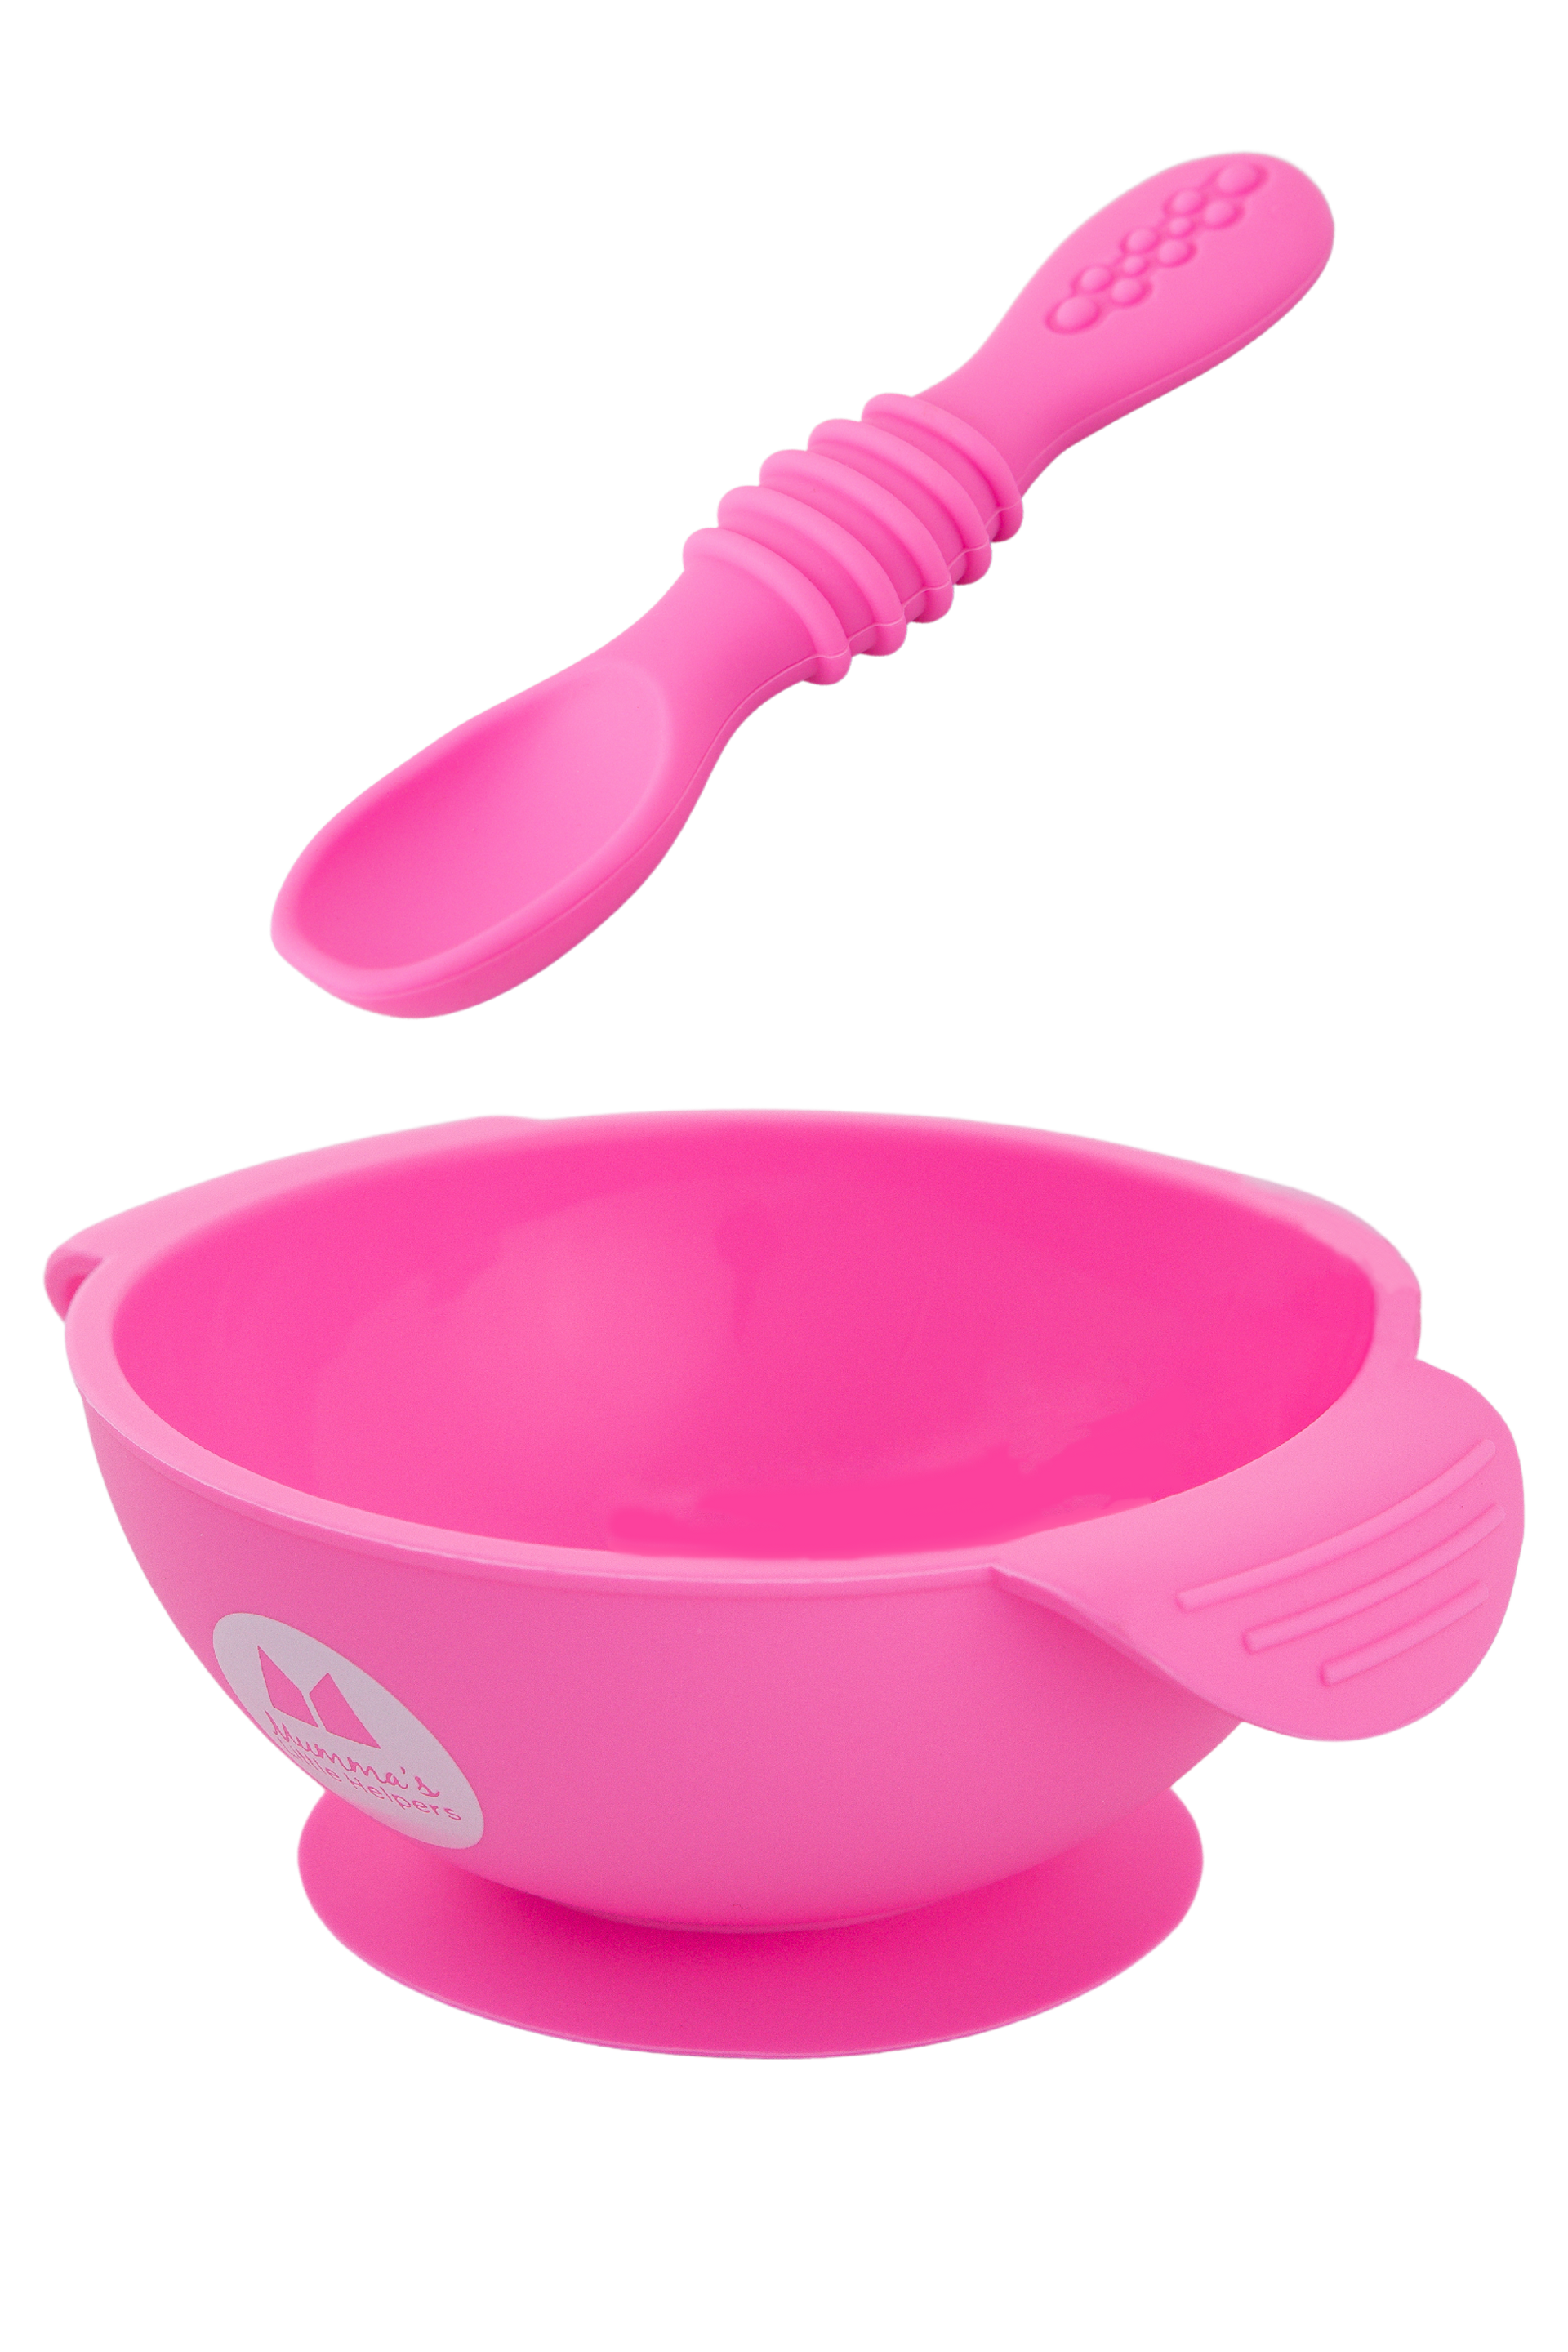 PERFECTION] Baby Bowl Sets Pink